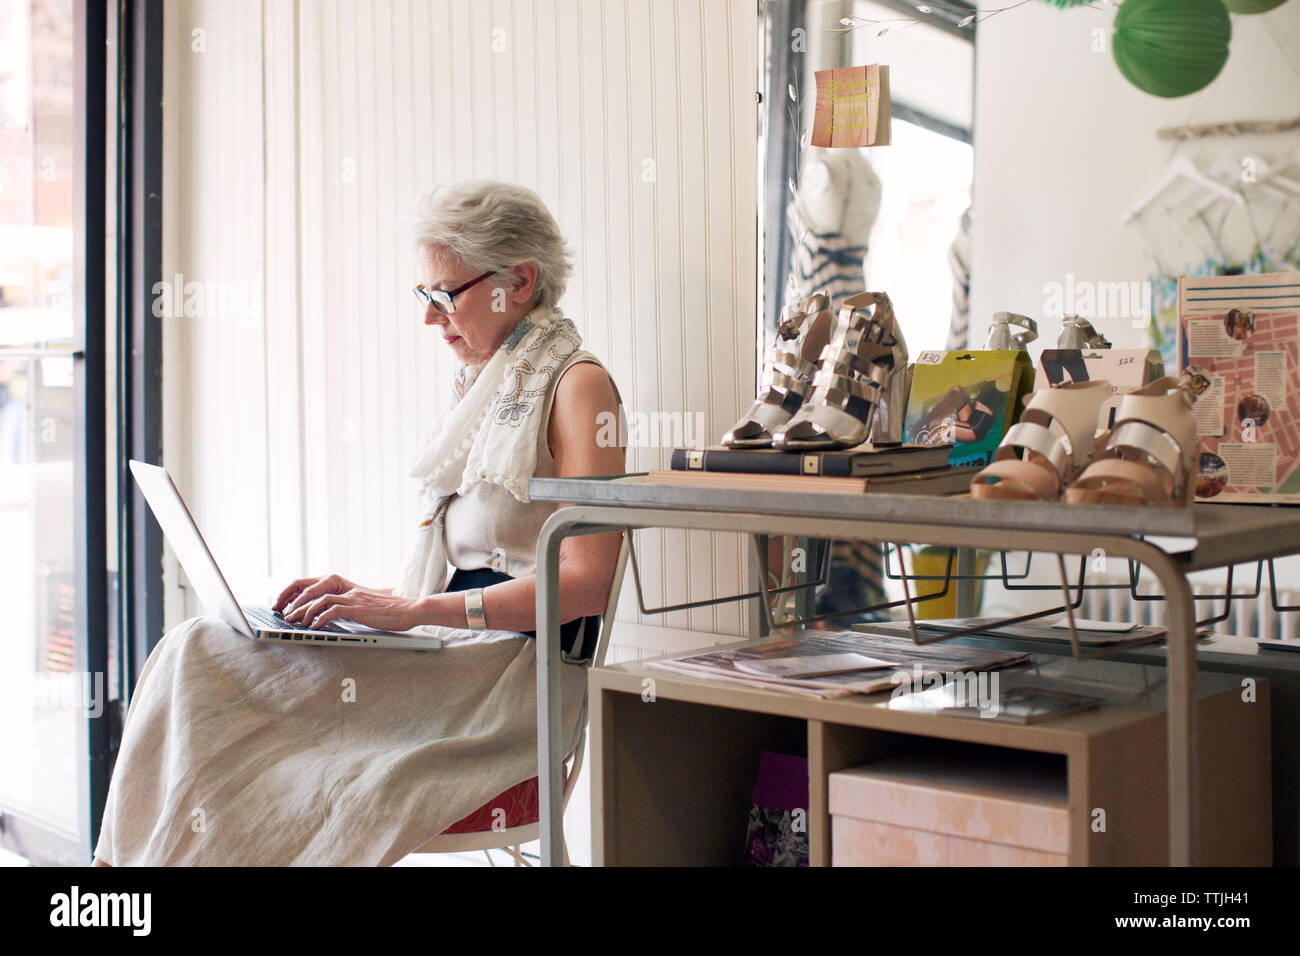 Side view of senior woman using laptop computer while sitting on chair in store Stock Photo